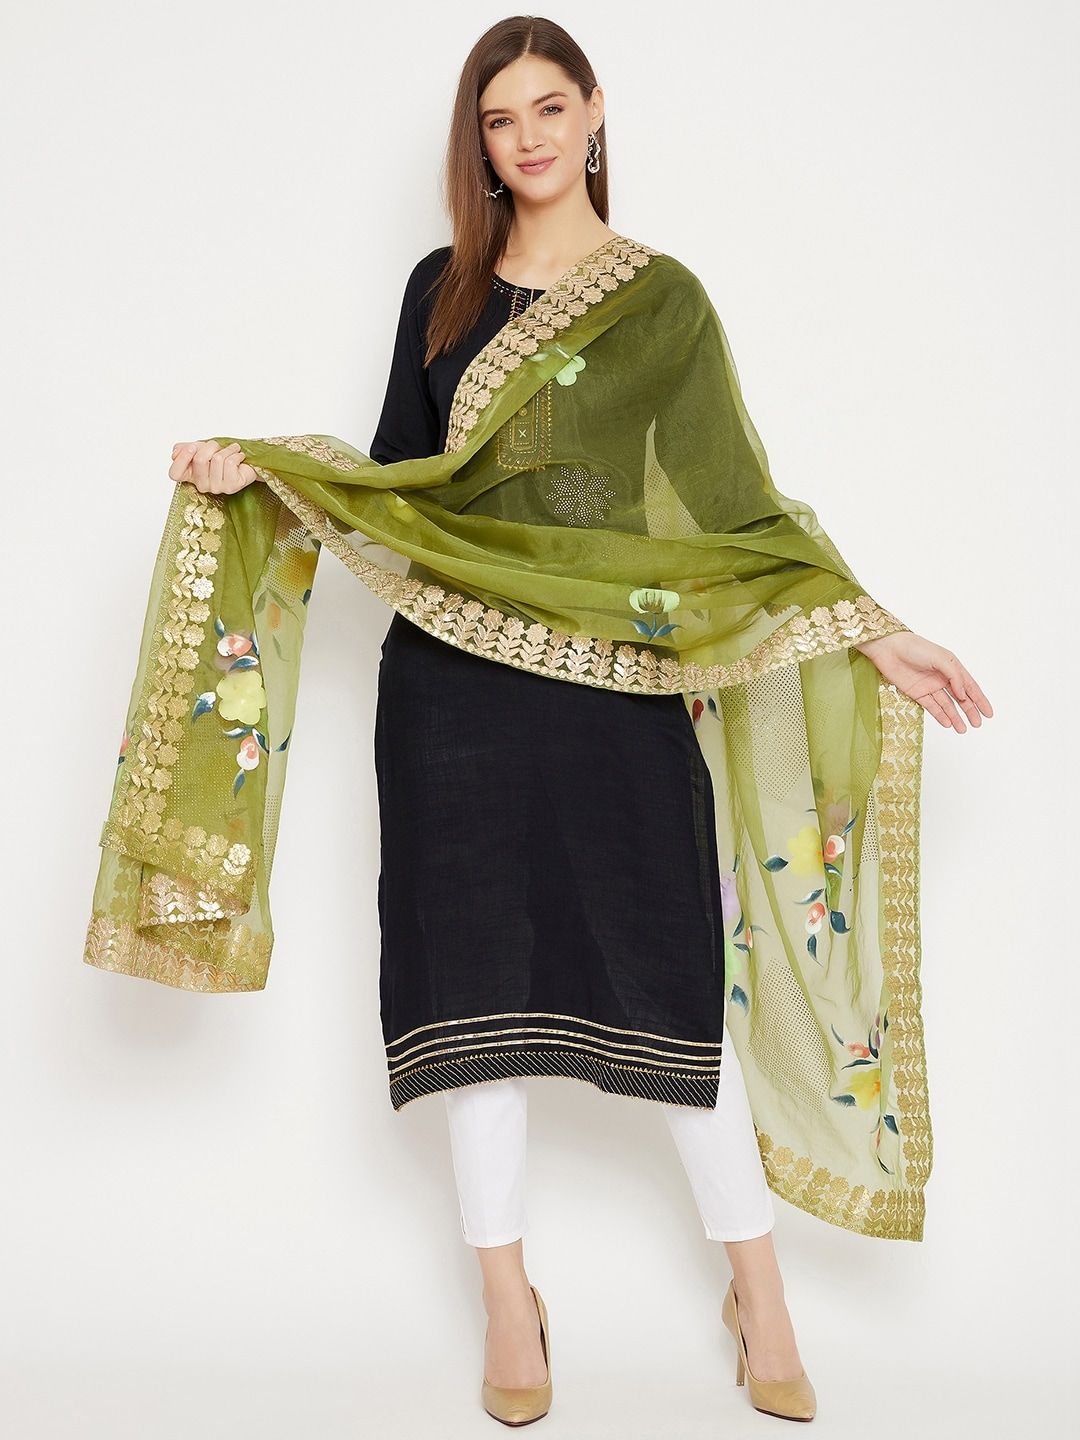 Clora Creation Olive Green & Gold-Toned Printed Dupatta Price in India